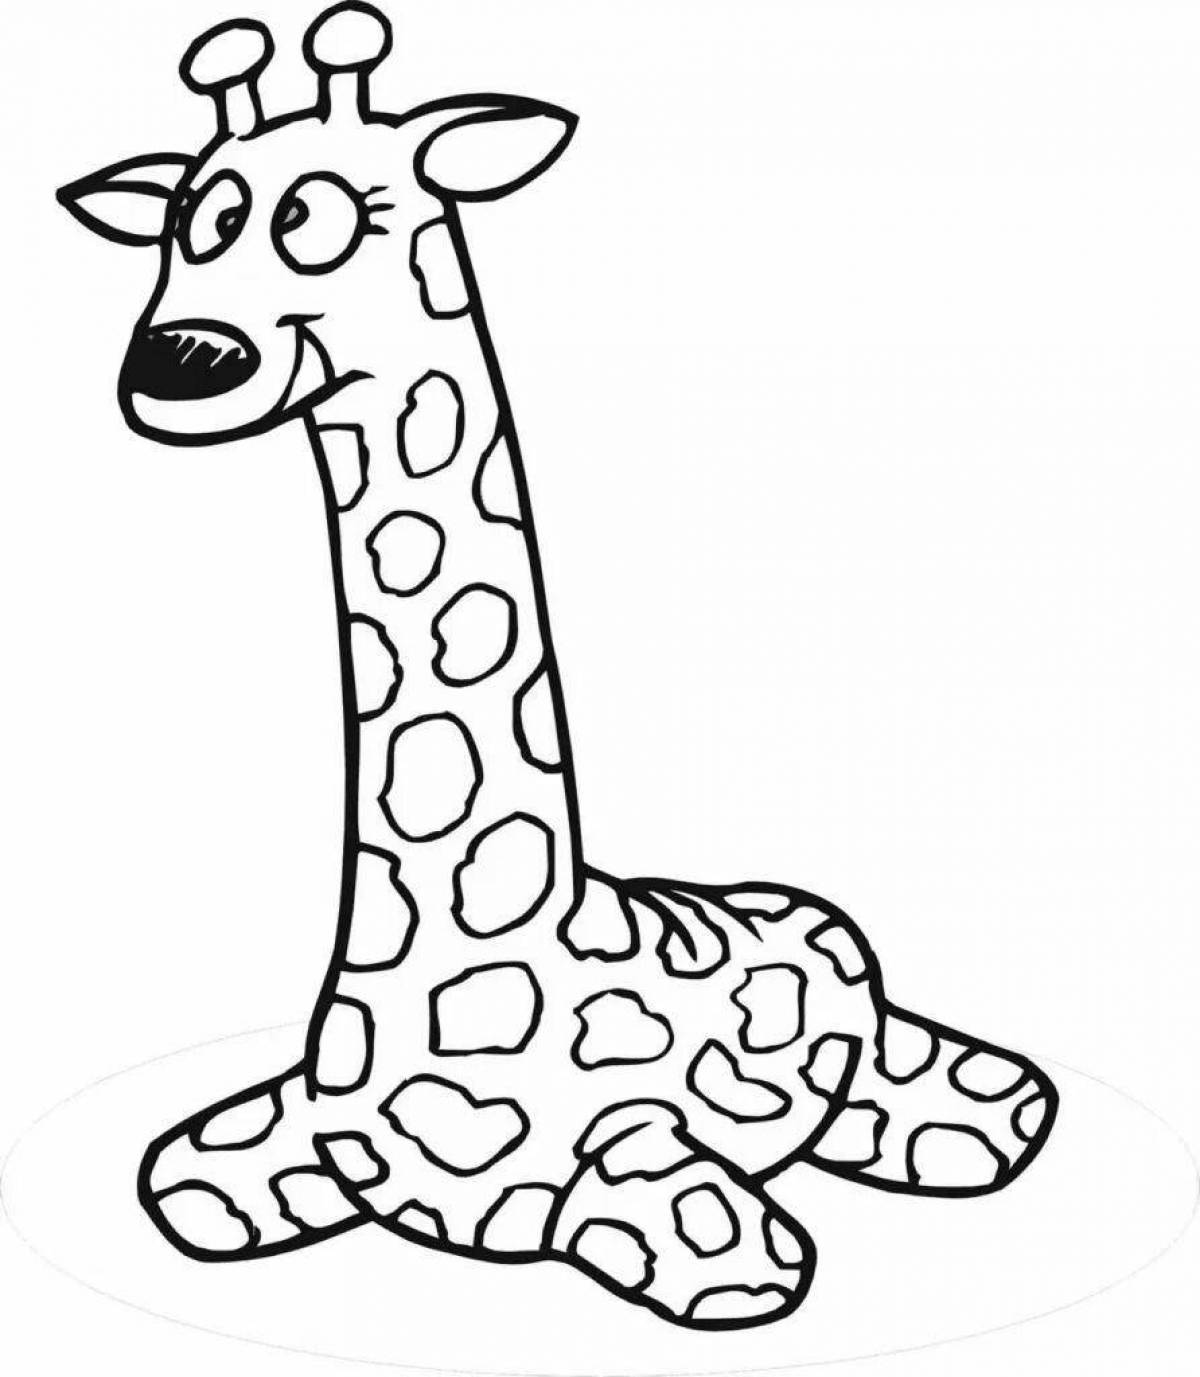 Adorable giraffe coloring book for little students